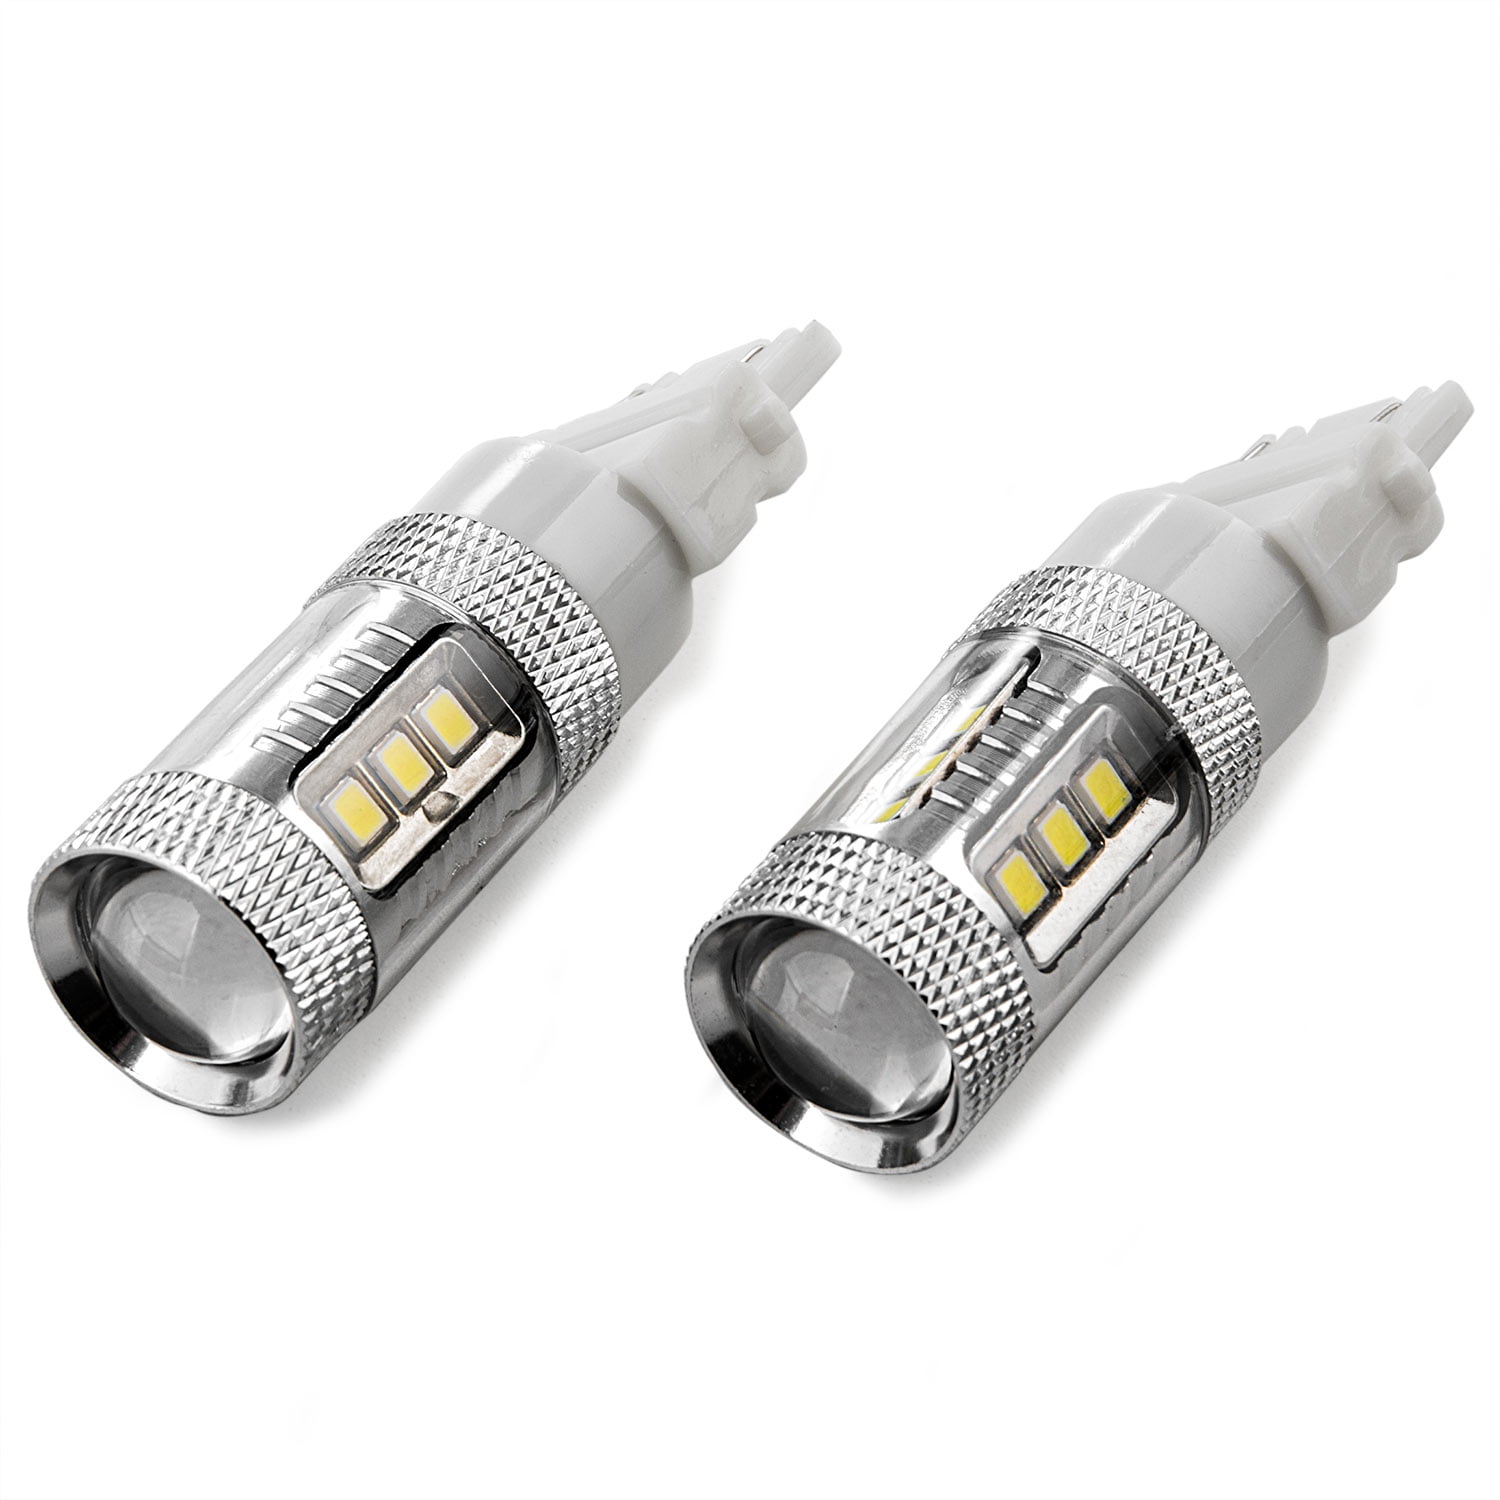 Xenon White iBrightstar Newest Extremely Bright 36-SMD 3030 Chipsets 3156 3157 3057 4157 LED Bulbs with Projector Lens replacement for Back Up Reverse Parking Daytime Running Lights 